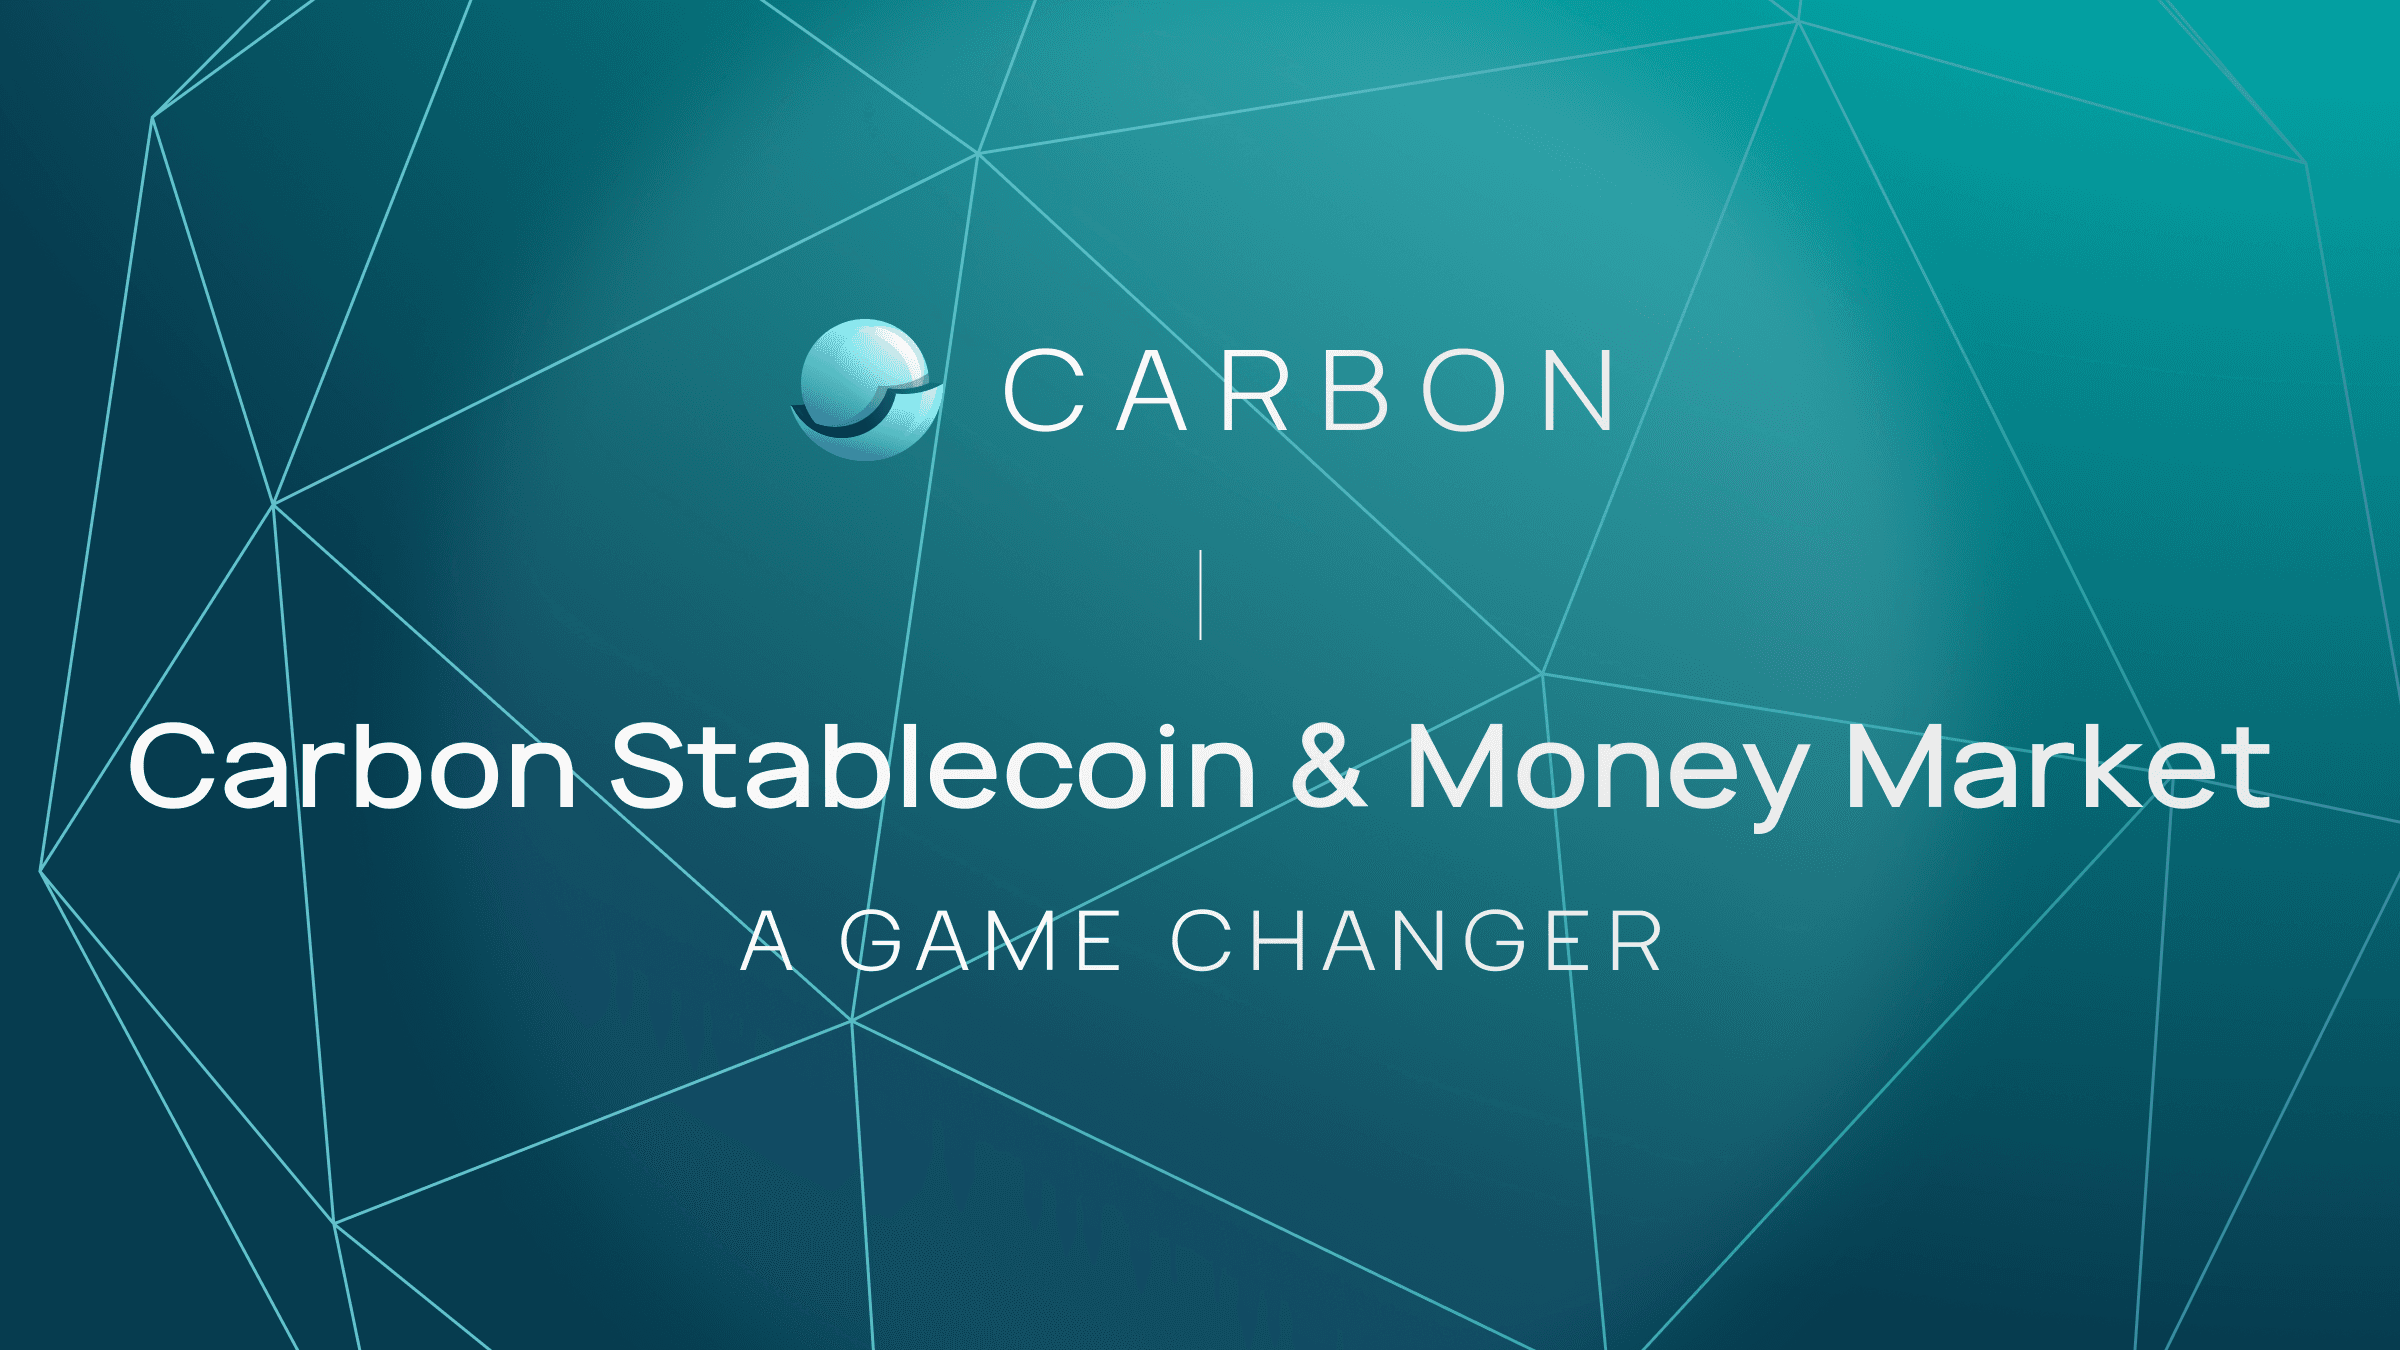 A Game Changer: Carbon Stablecoin & Money Market Coming Soon